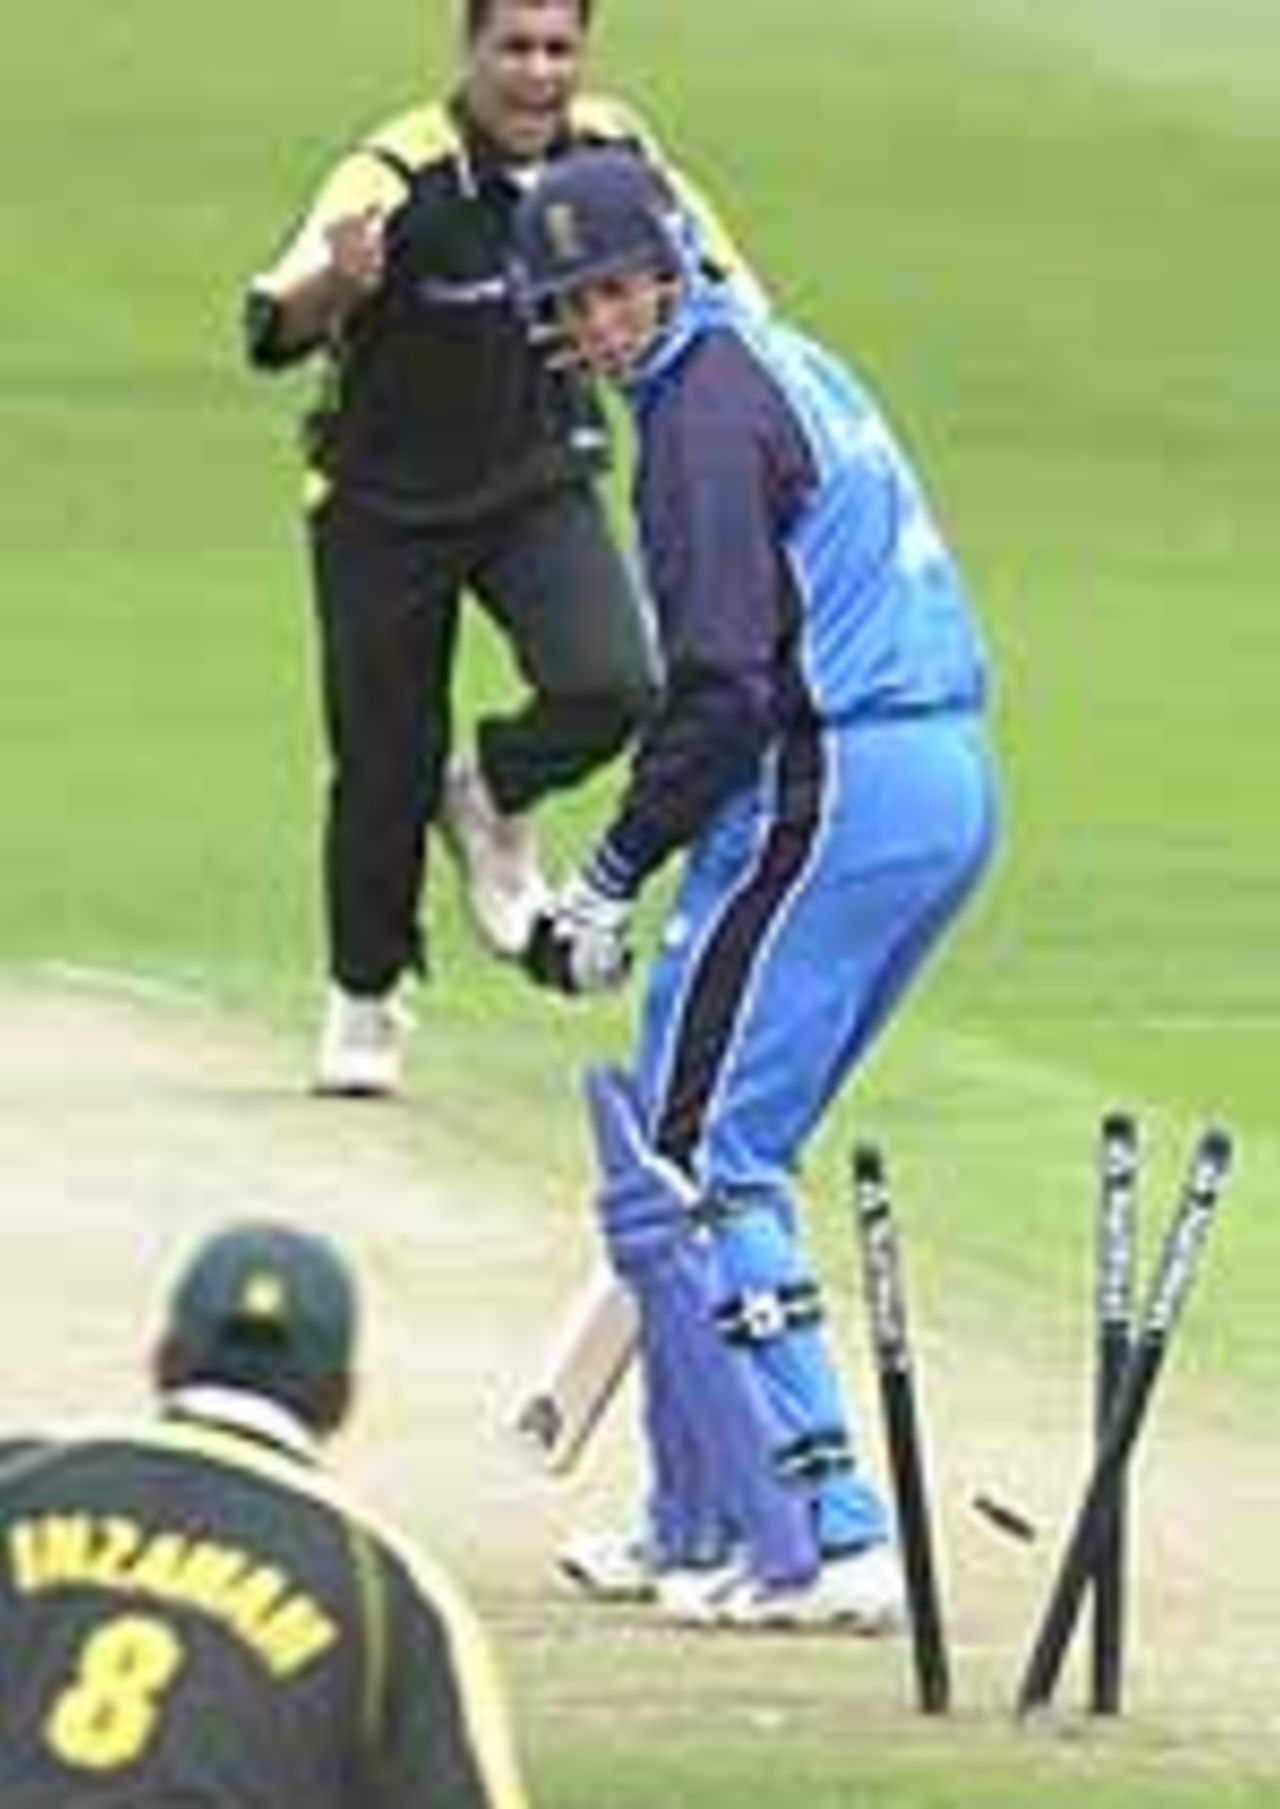 17 Jun 2001; Marcus Trescothick was bowled first ball by Waqar Younis in the NatWest Series match at Headingley